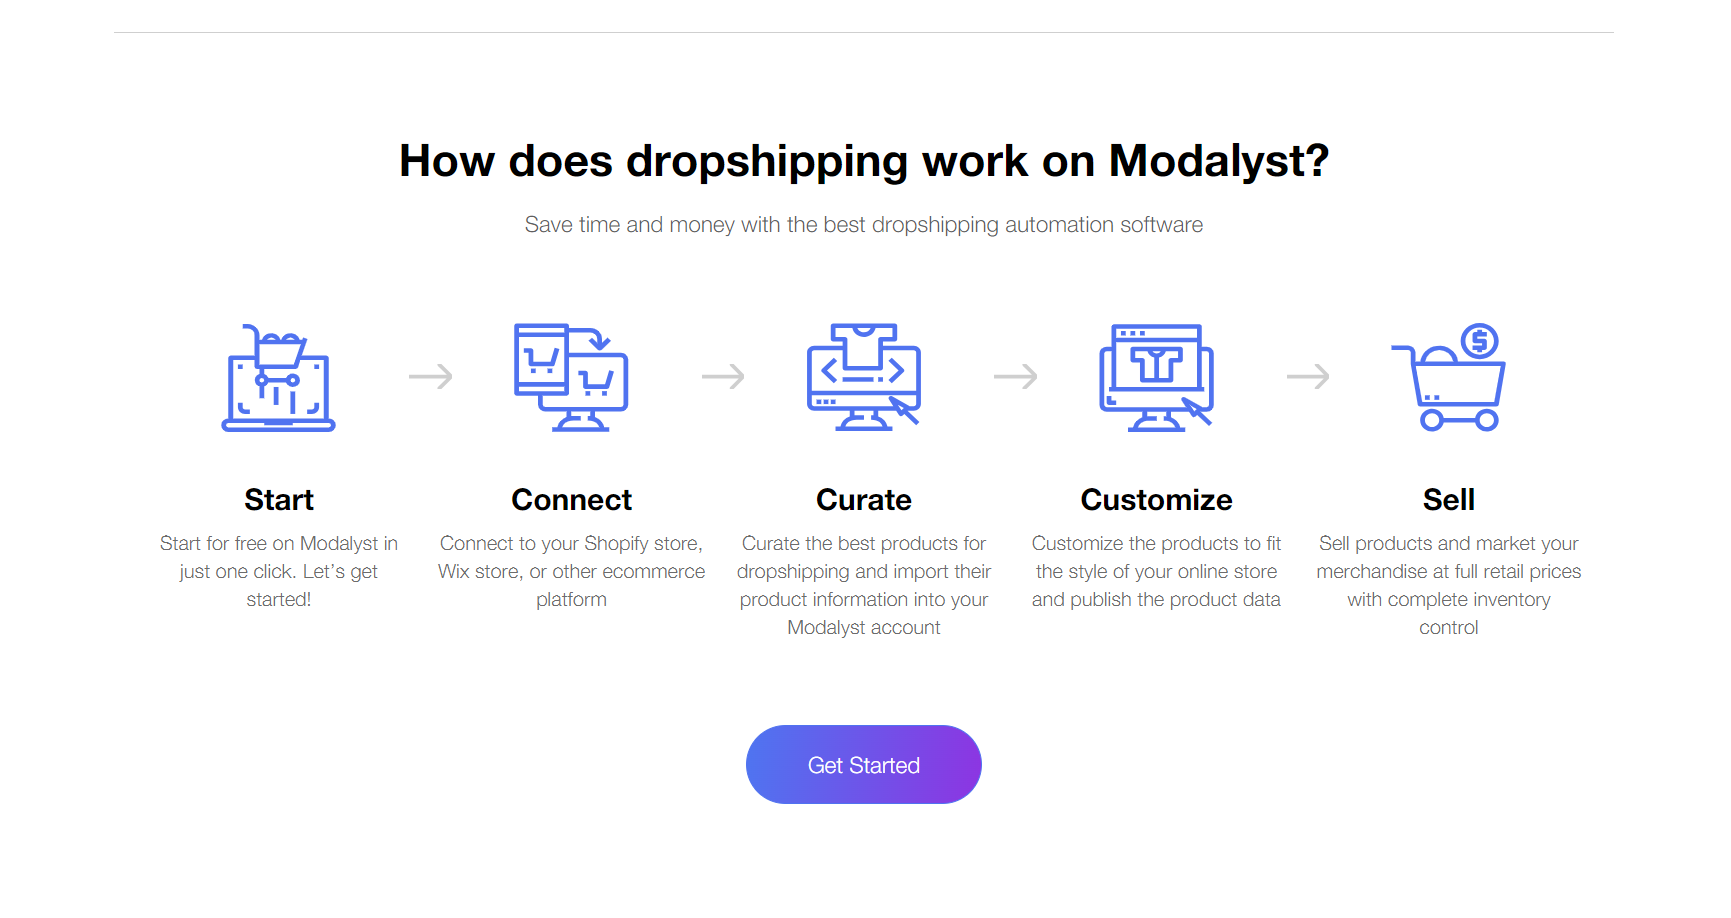 HOW TO GET THE BEST DEAL WITH MODALYST DROPSHIPPING?